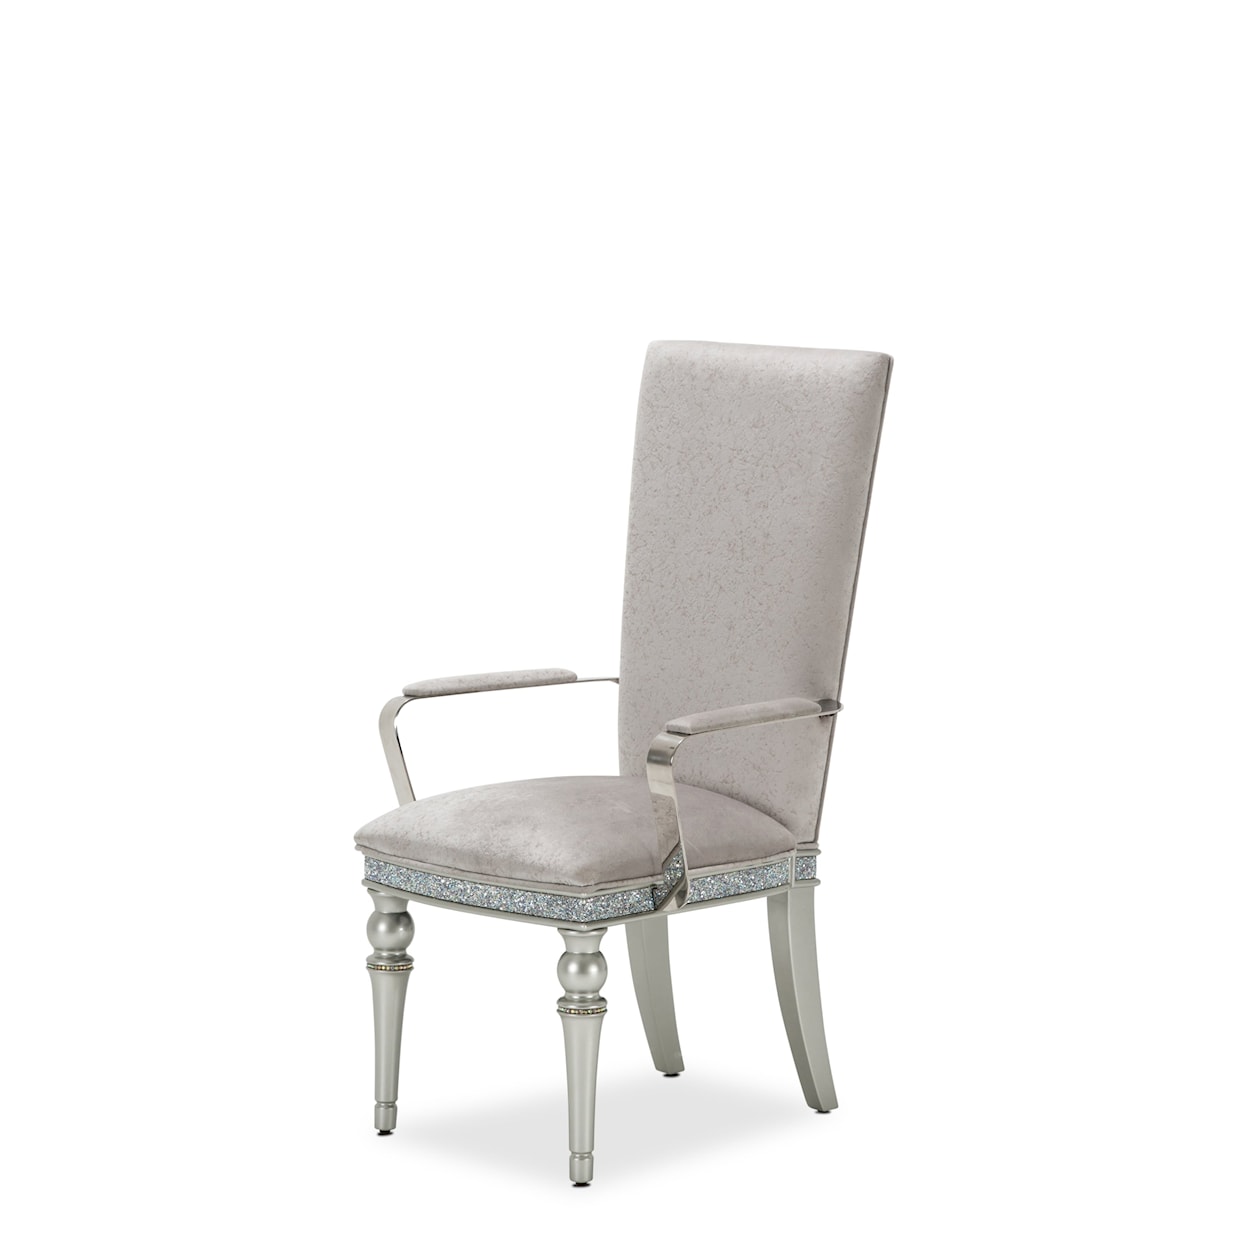 Michael Amini Melrose Plaza Upholstered Arm Dining Chair